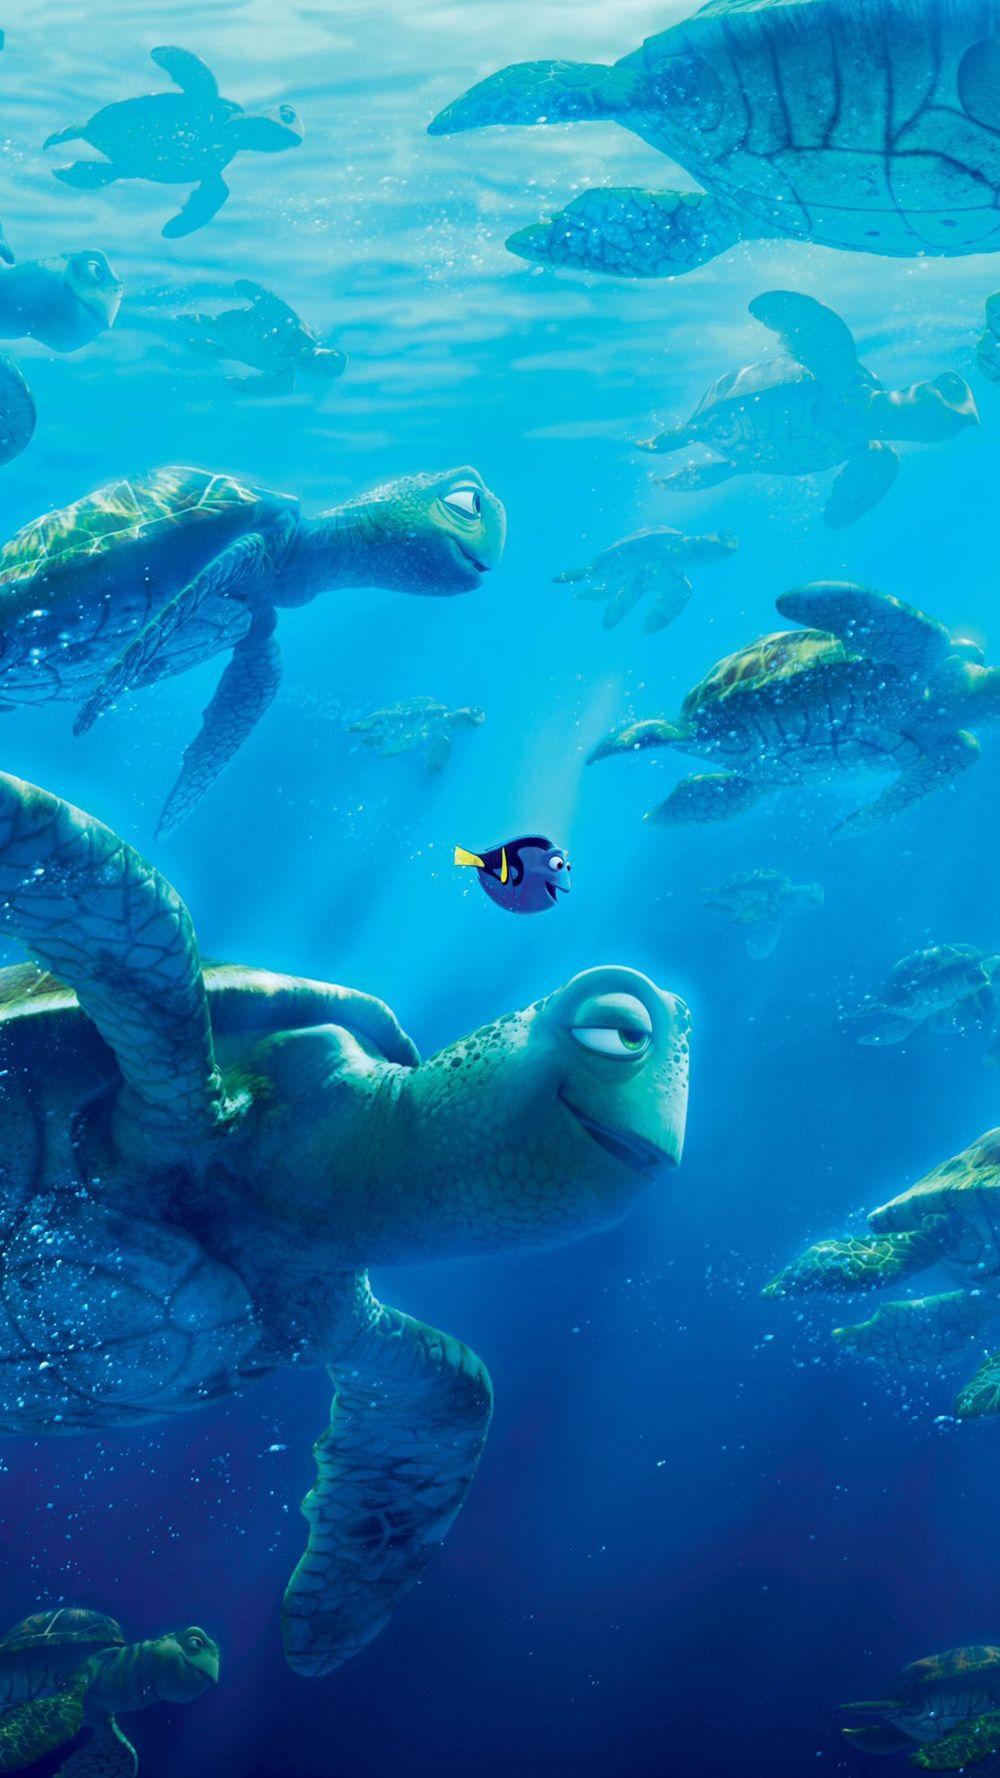 Finding Dory: Downloadable Wallpaper for iOS & Android Phones